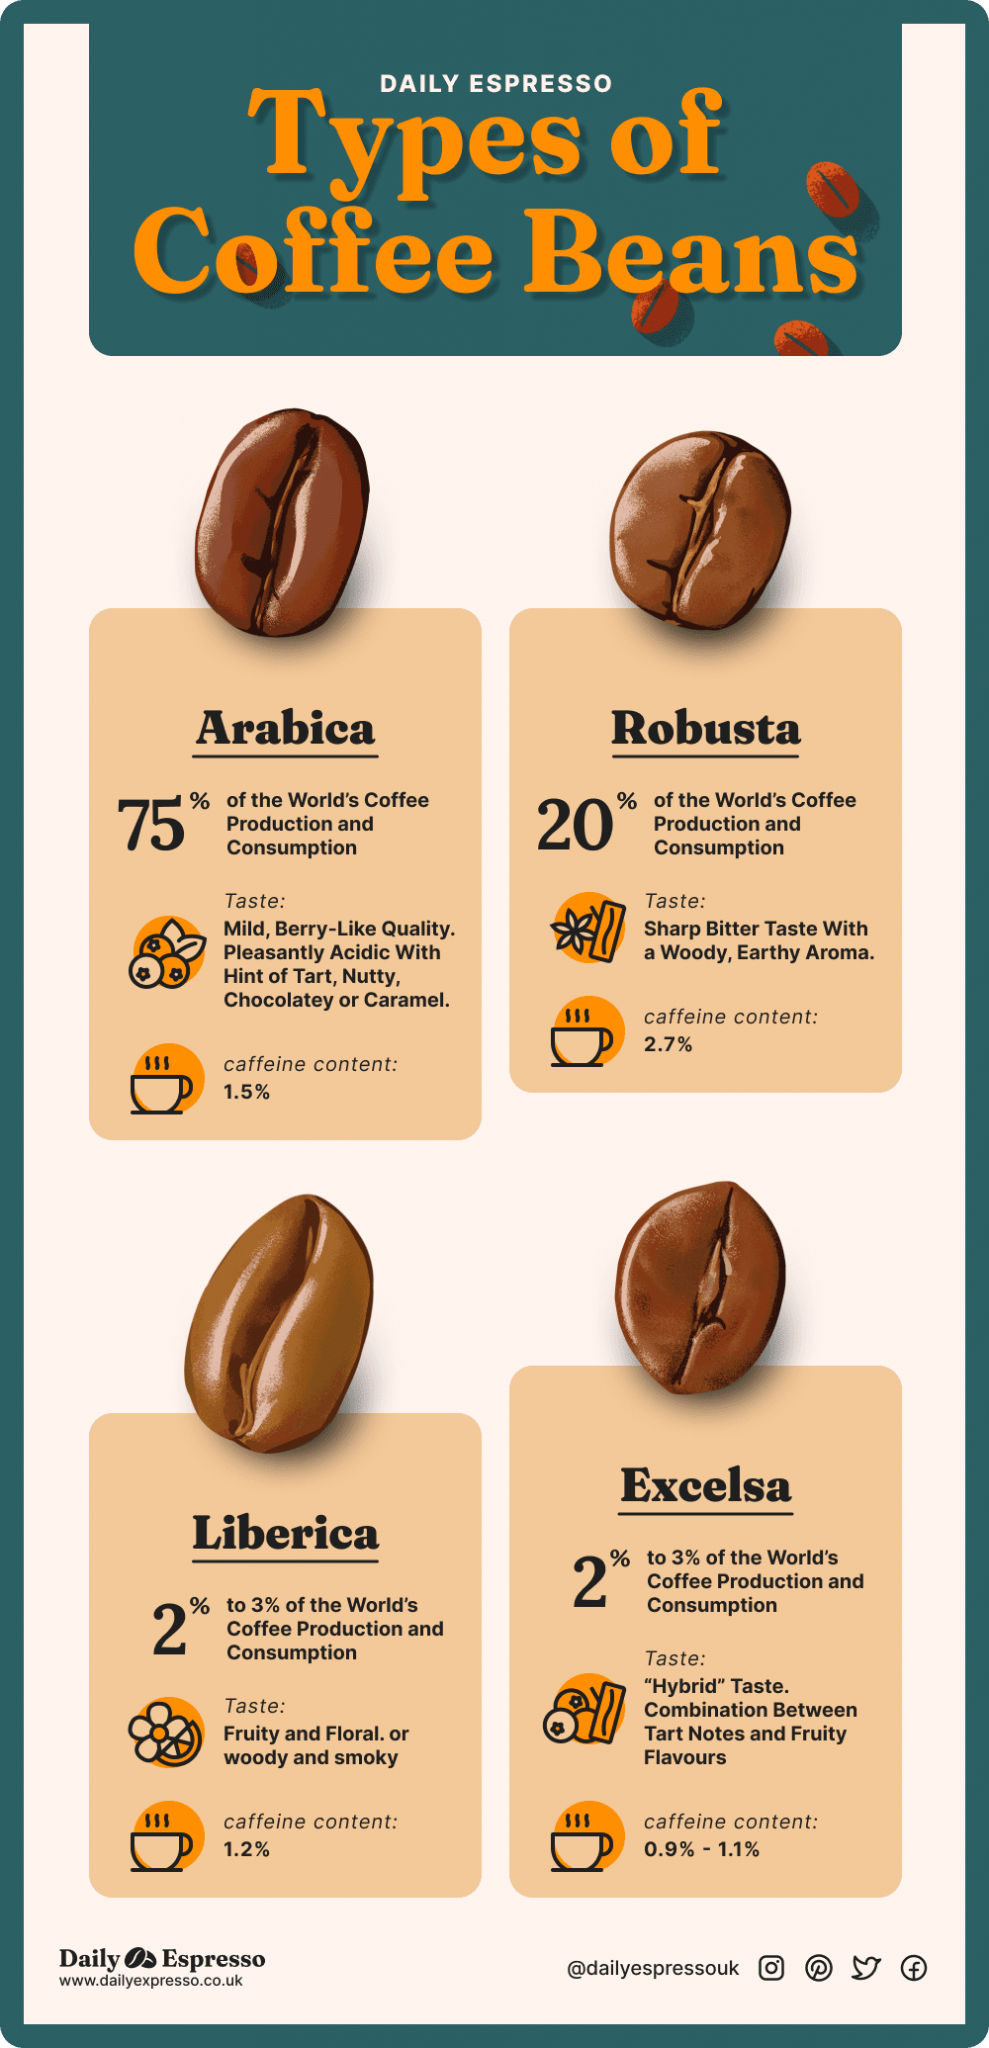 Types of Coffee Beans: All 4 Species Explained + Pictures